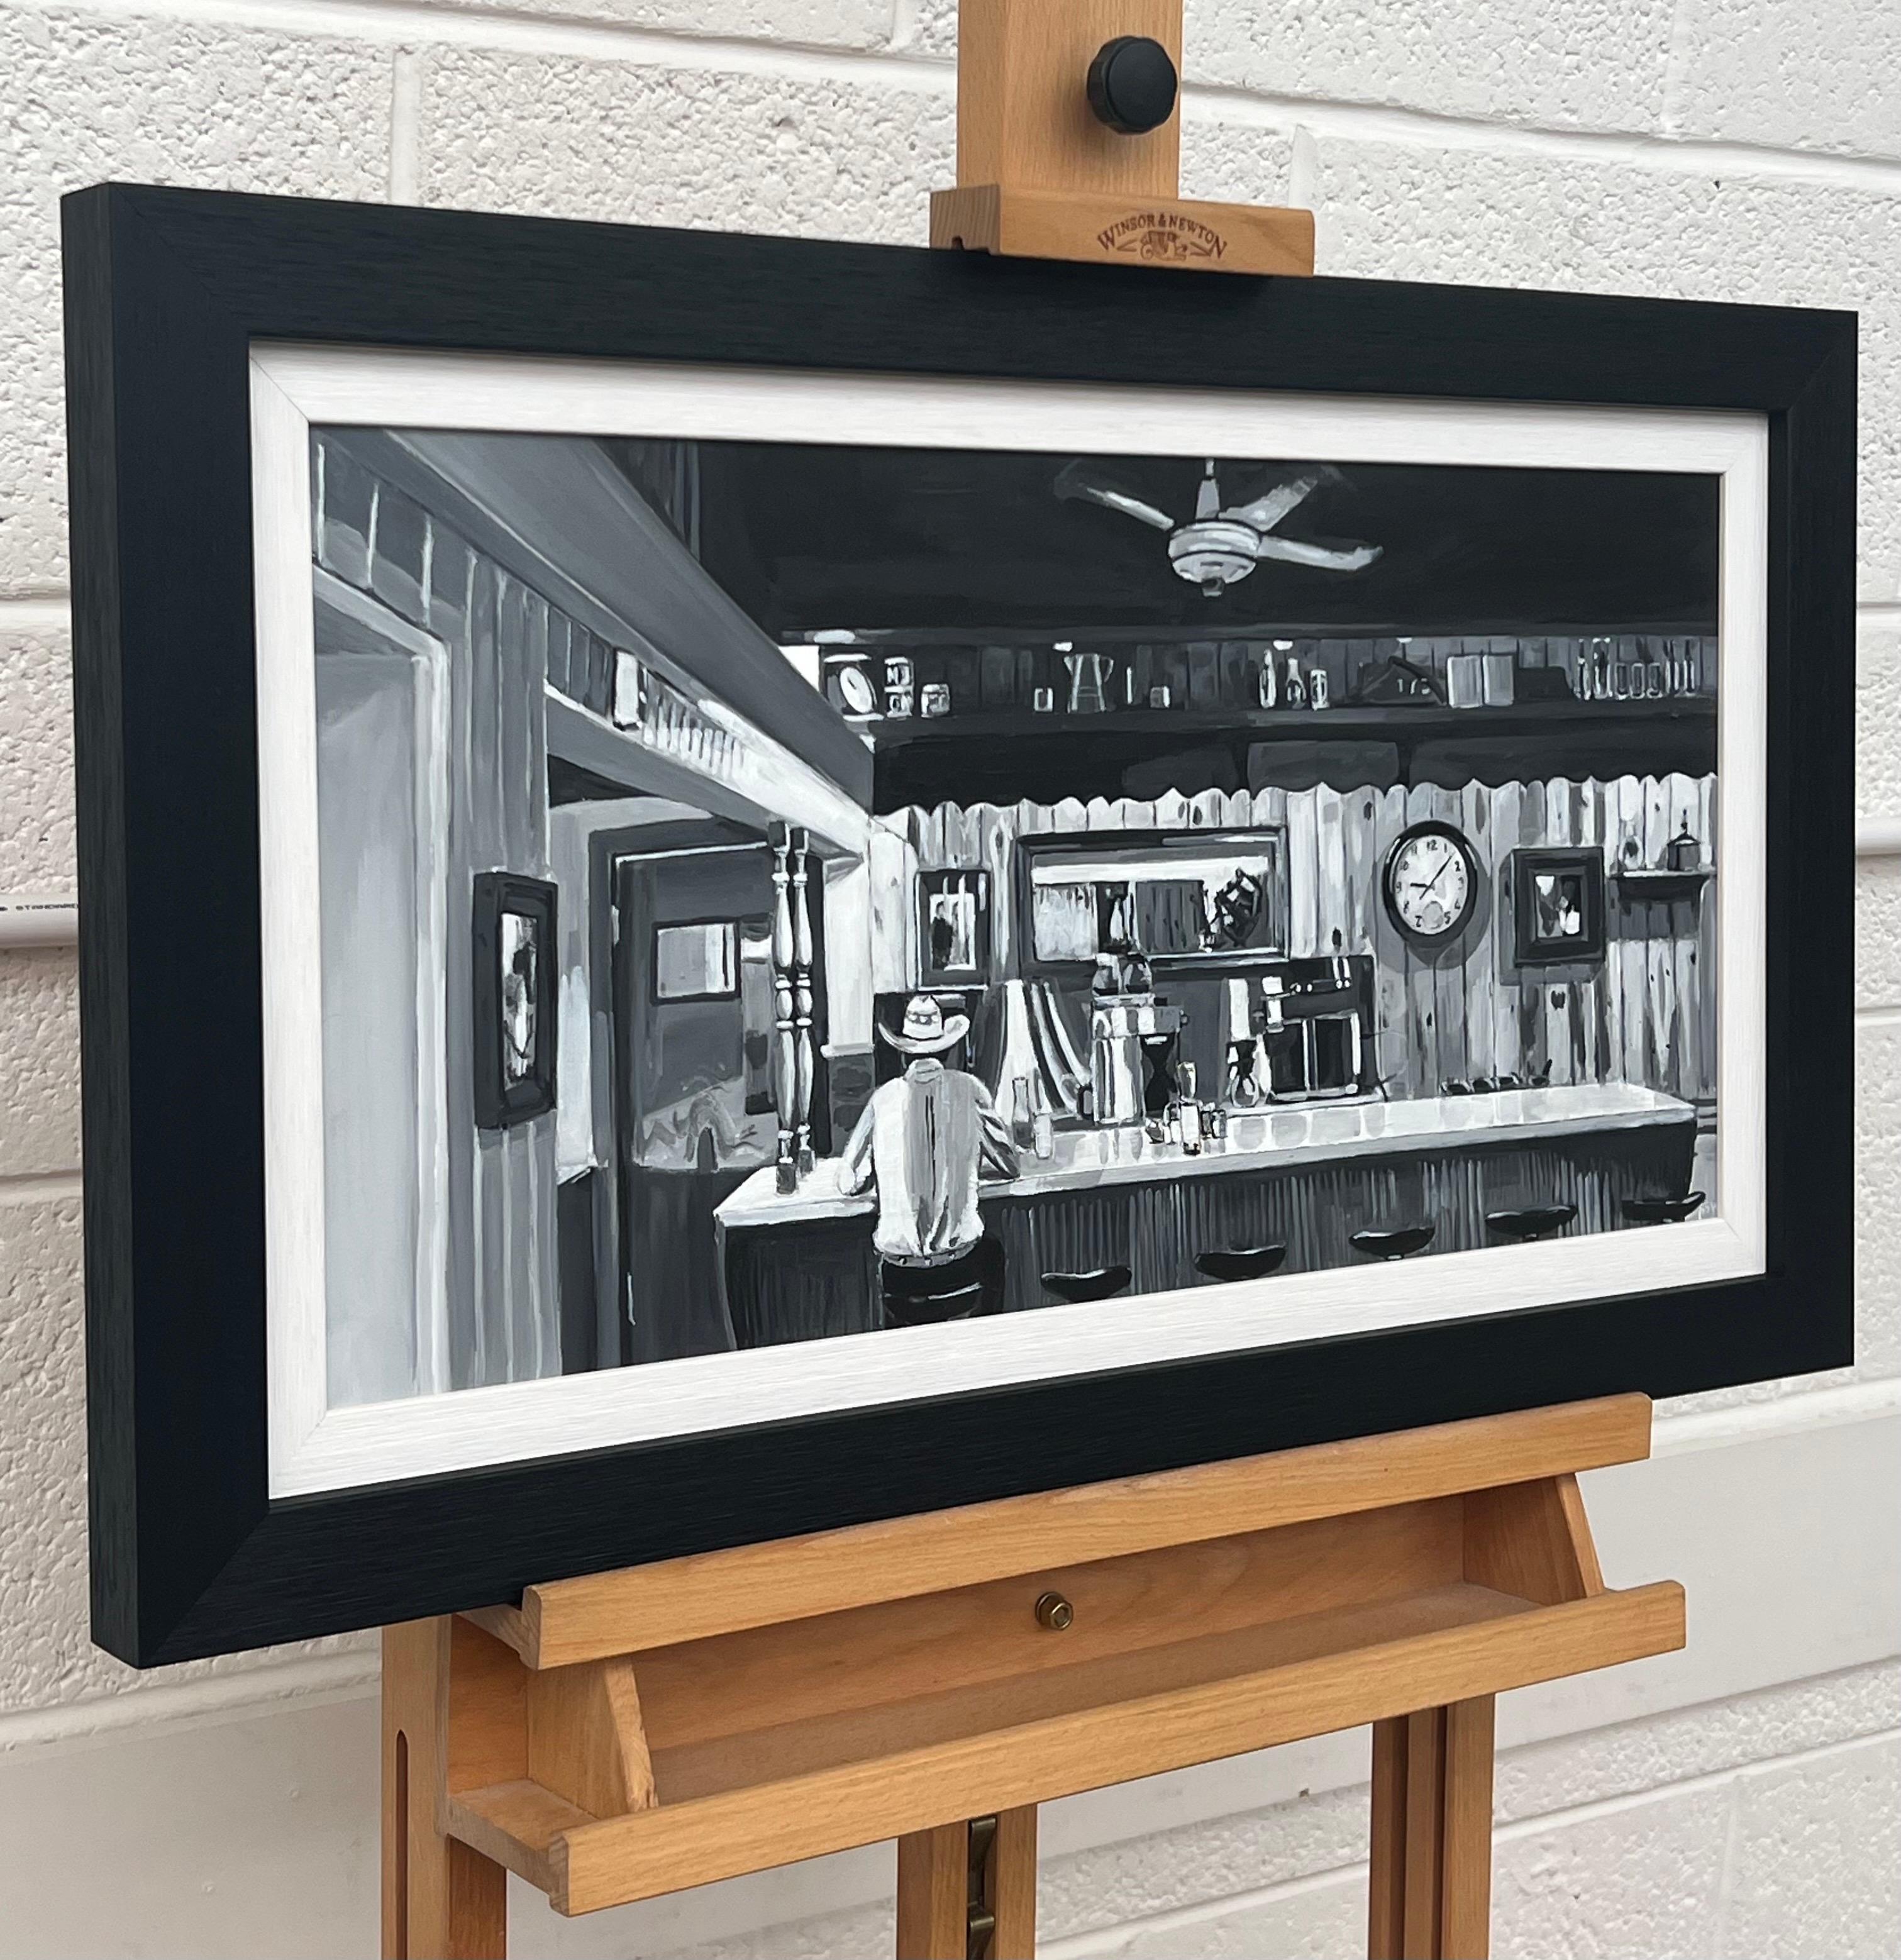 American Cowboy Diner Painting by British Contemporary Artist in Black & White, by British Contemporary Artist, Angela Wakefield. This is No.14 of her Americana Series, which features American Diners, Food Courts, Truck Stops, Gas Stations, Still